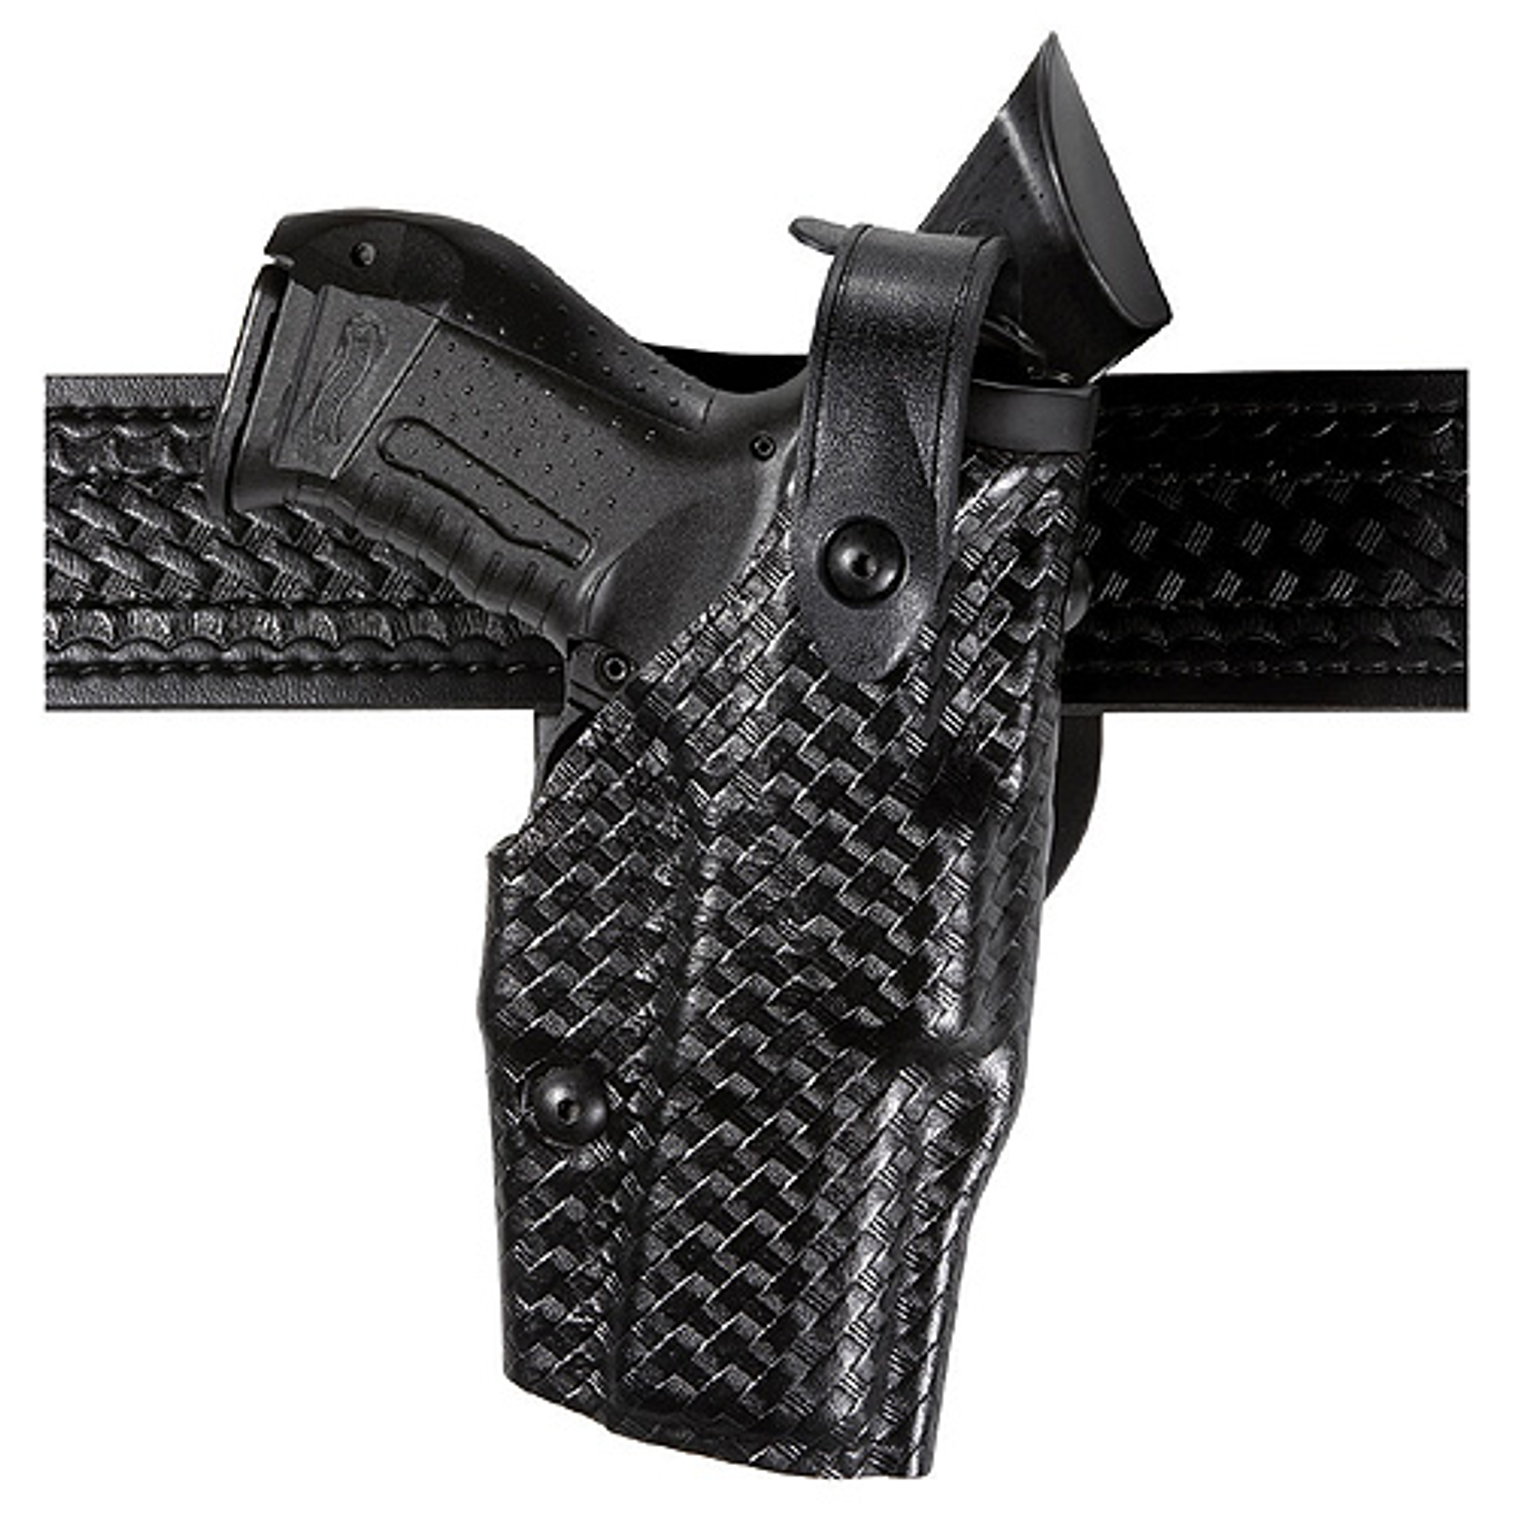 Model 6360 Als/sls Mid-ride, Level Iii Retention Duty Holster For Sig Sauer P320c